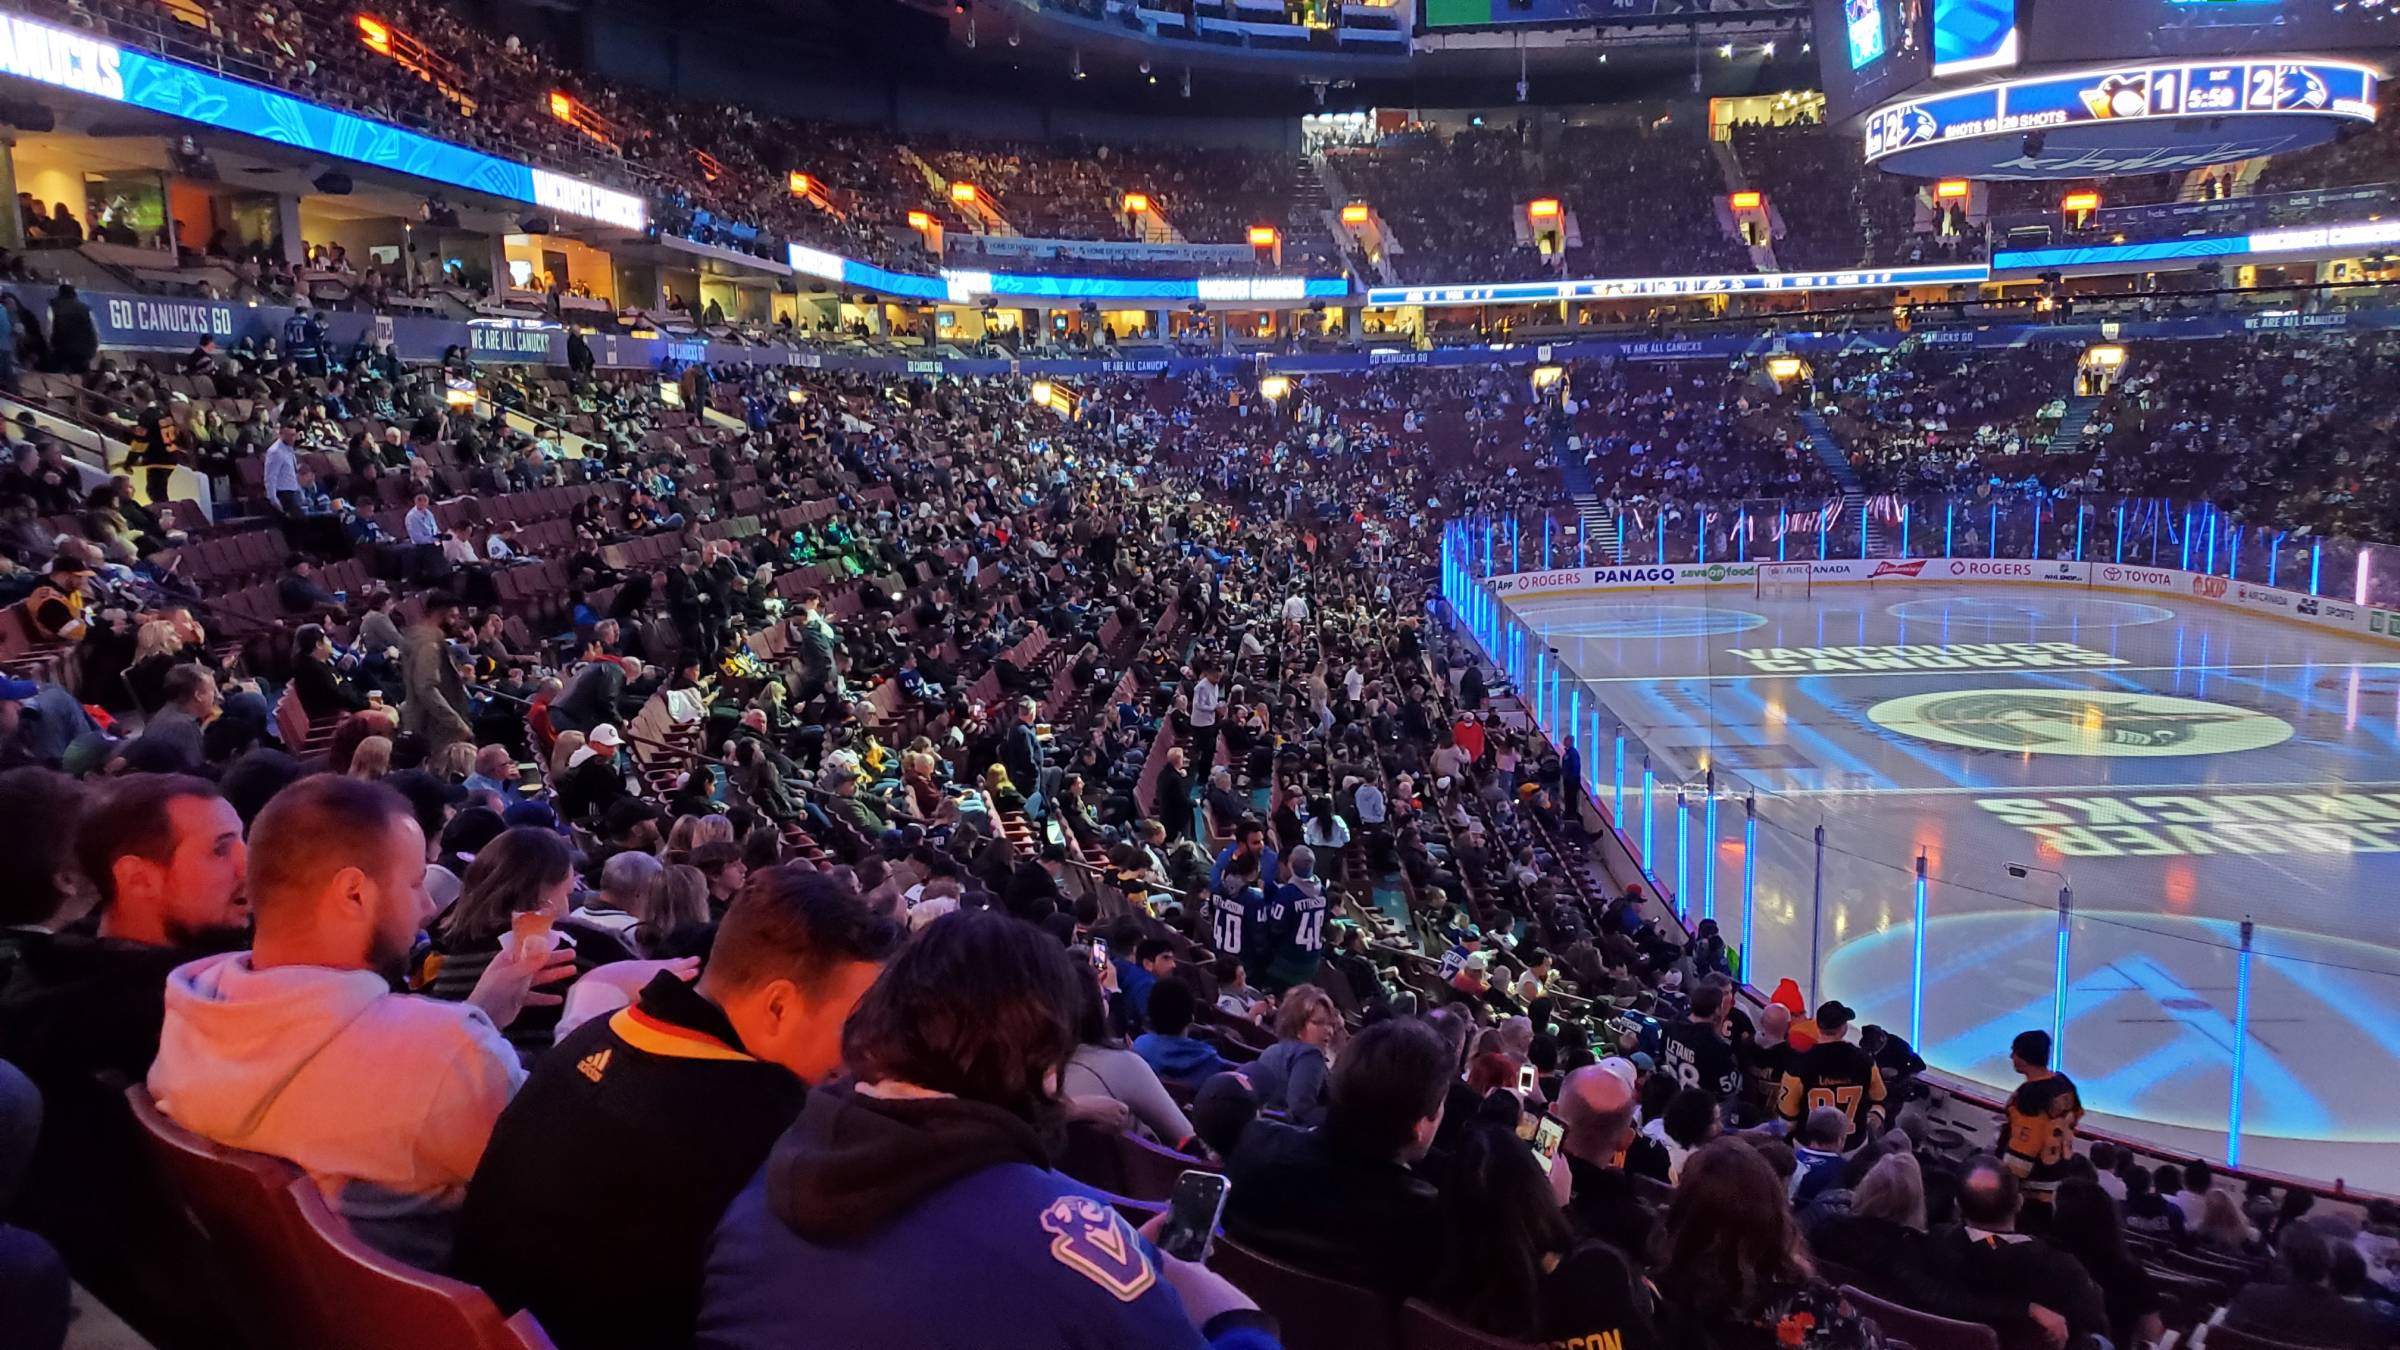 Section 103 at Rogers Arena